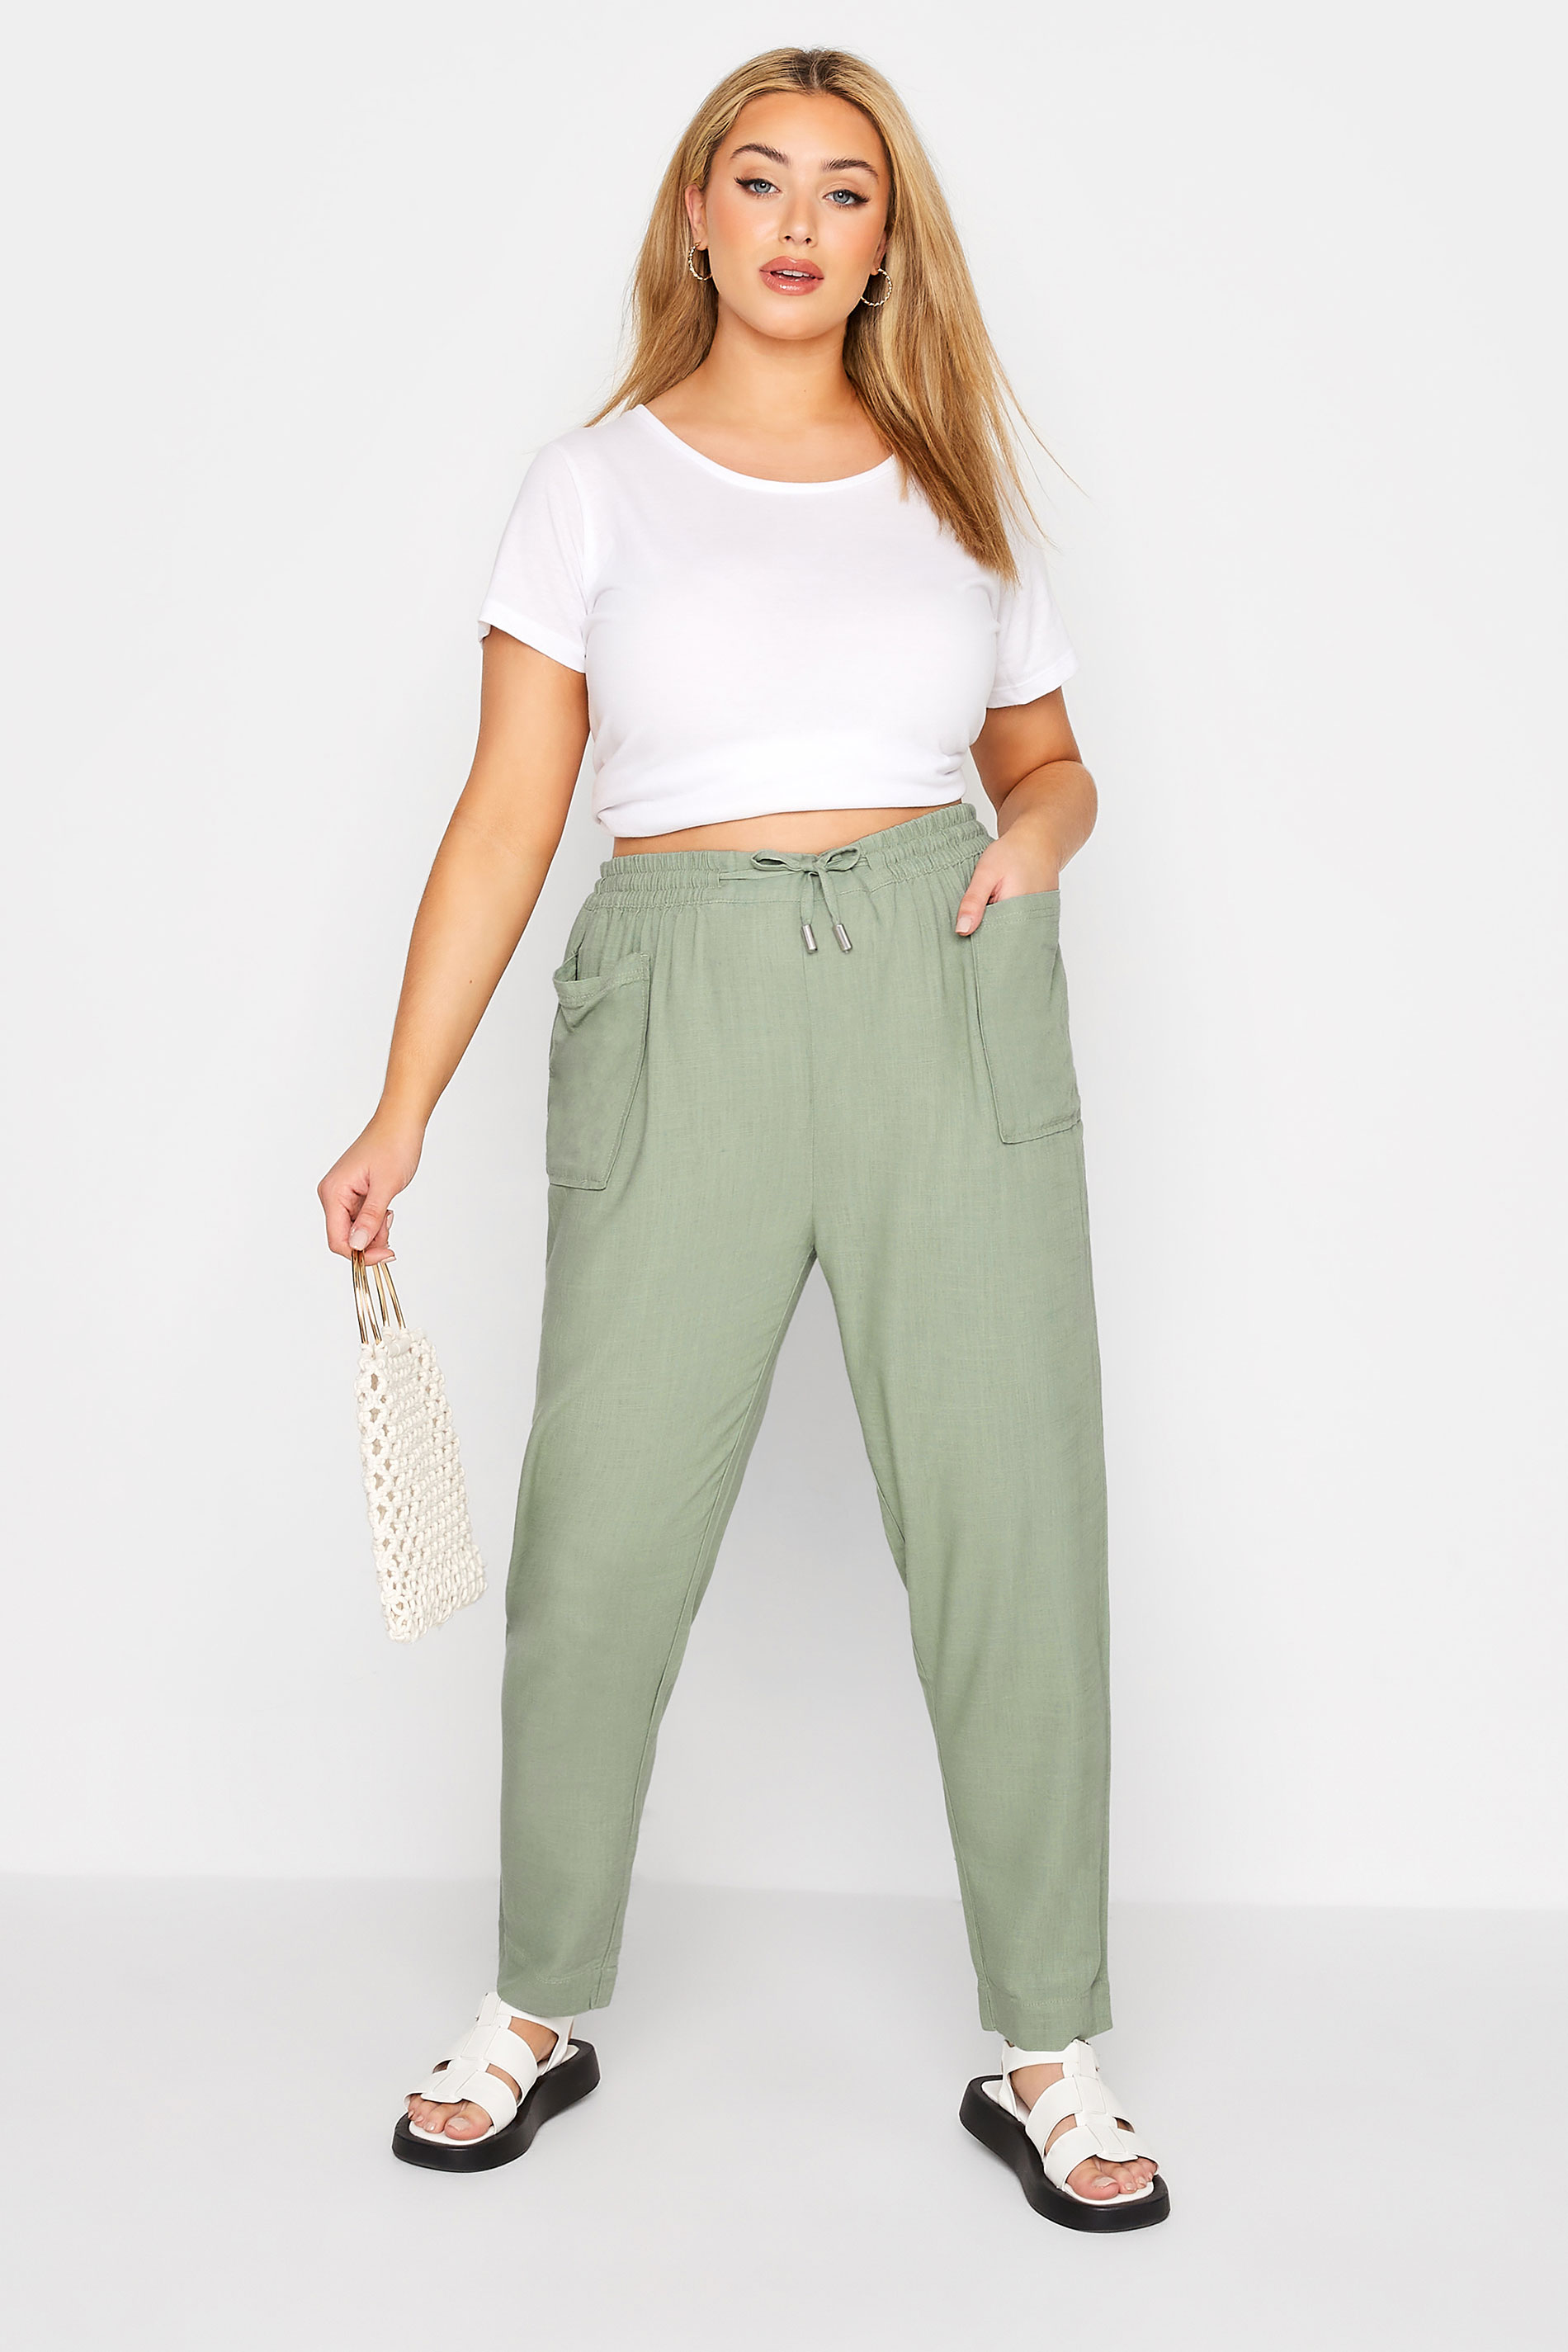 Plus Size Khaki Green Linen Look Joggers | Yours Clothing  2